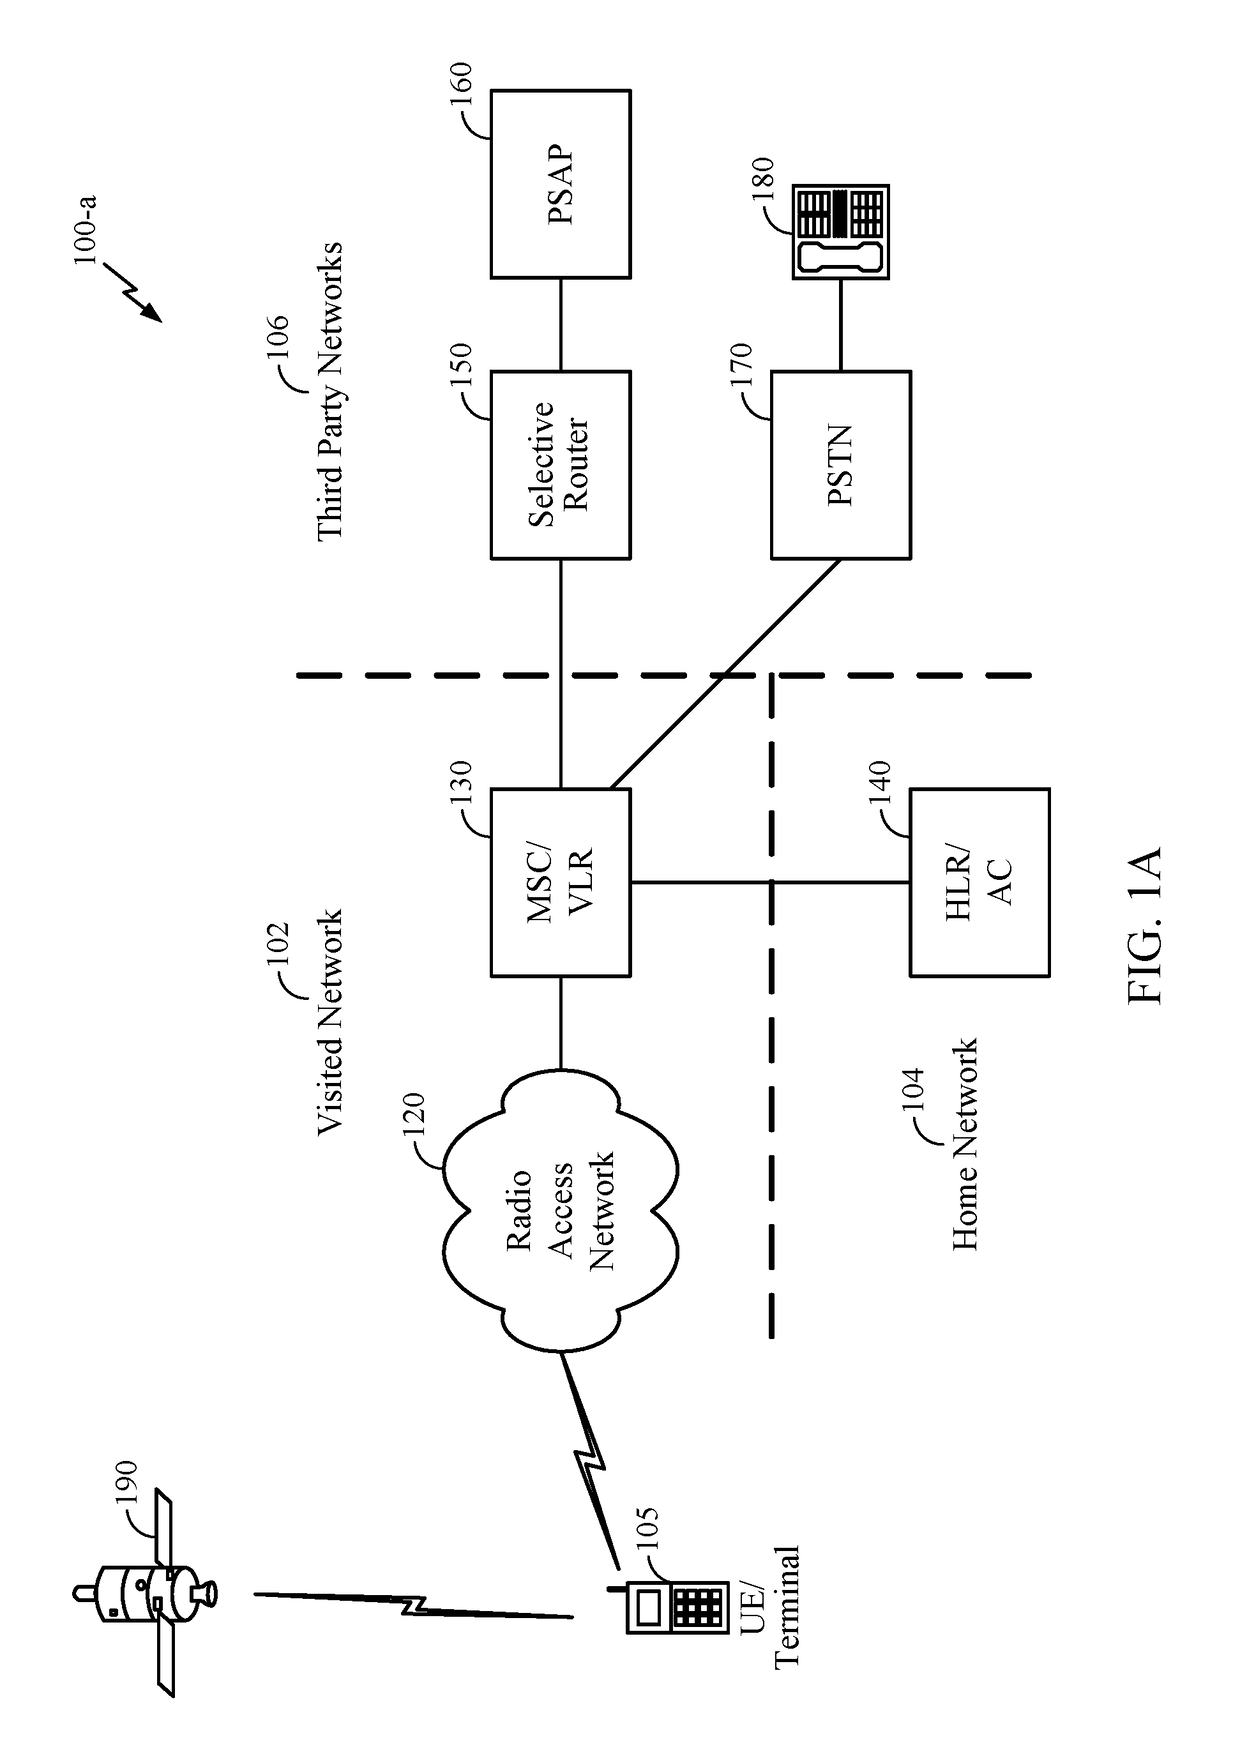 Systems and methods to improve mobility for a mobile device in ecall-only mode